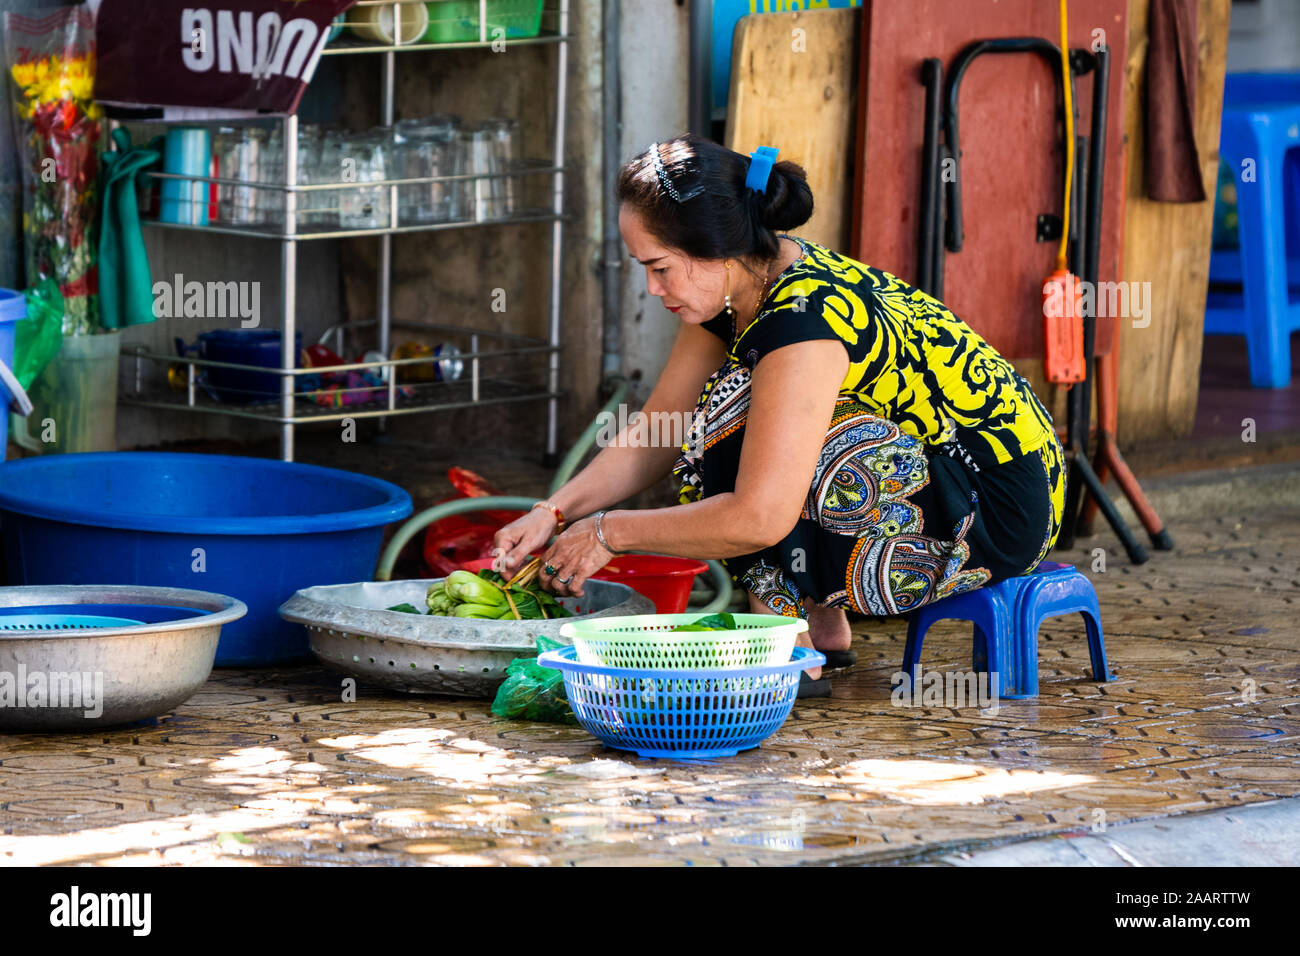 Hanoi, Vietnam - 12th October 2019: An Asian woman washes and prepares vegetables to sell as street food for lunch in the streets Stock Photo